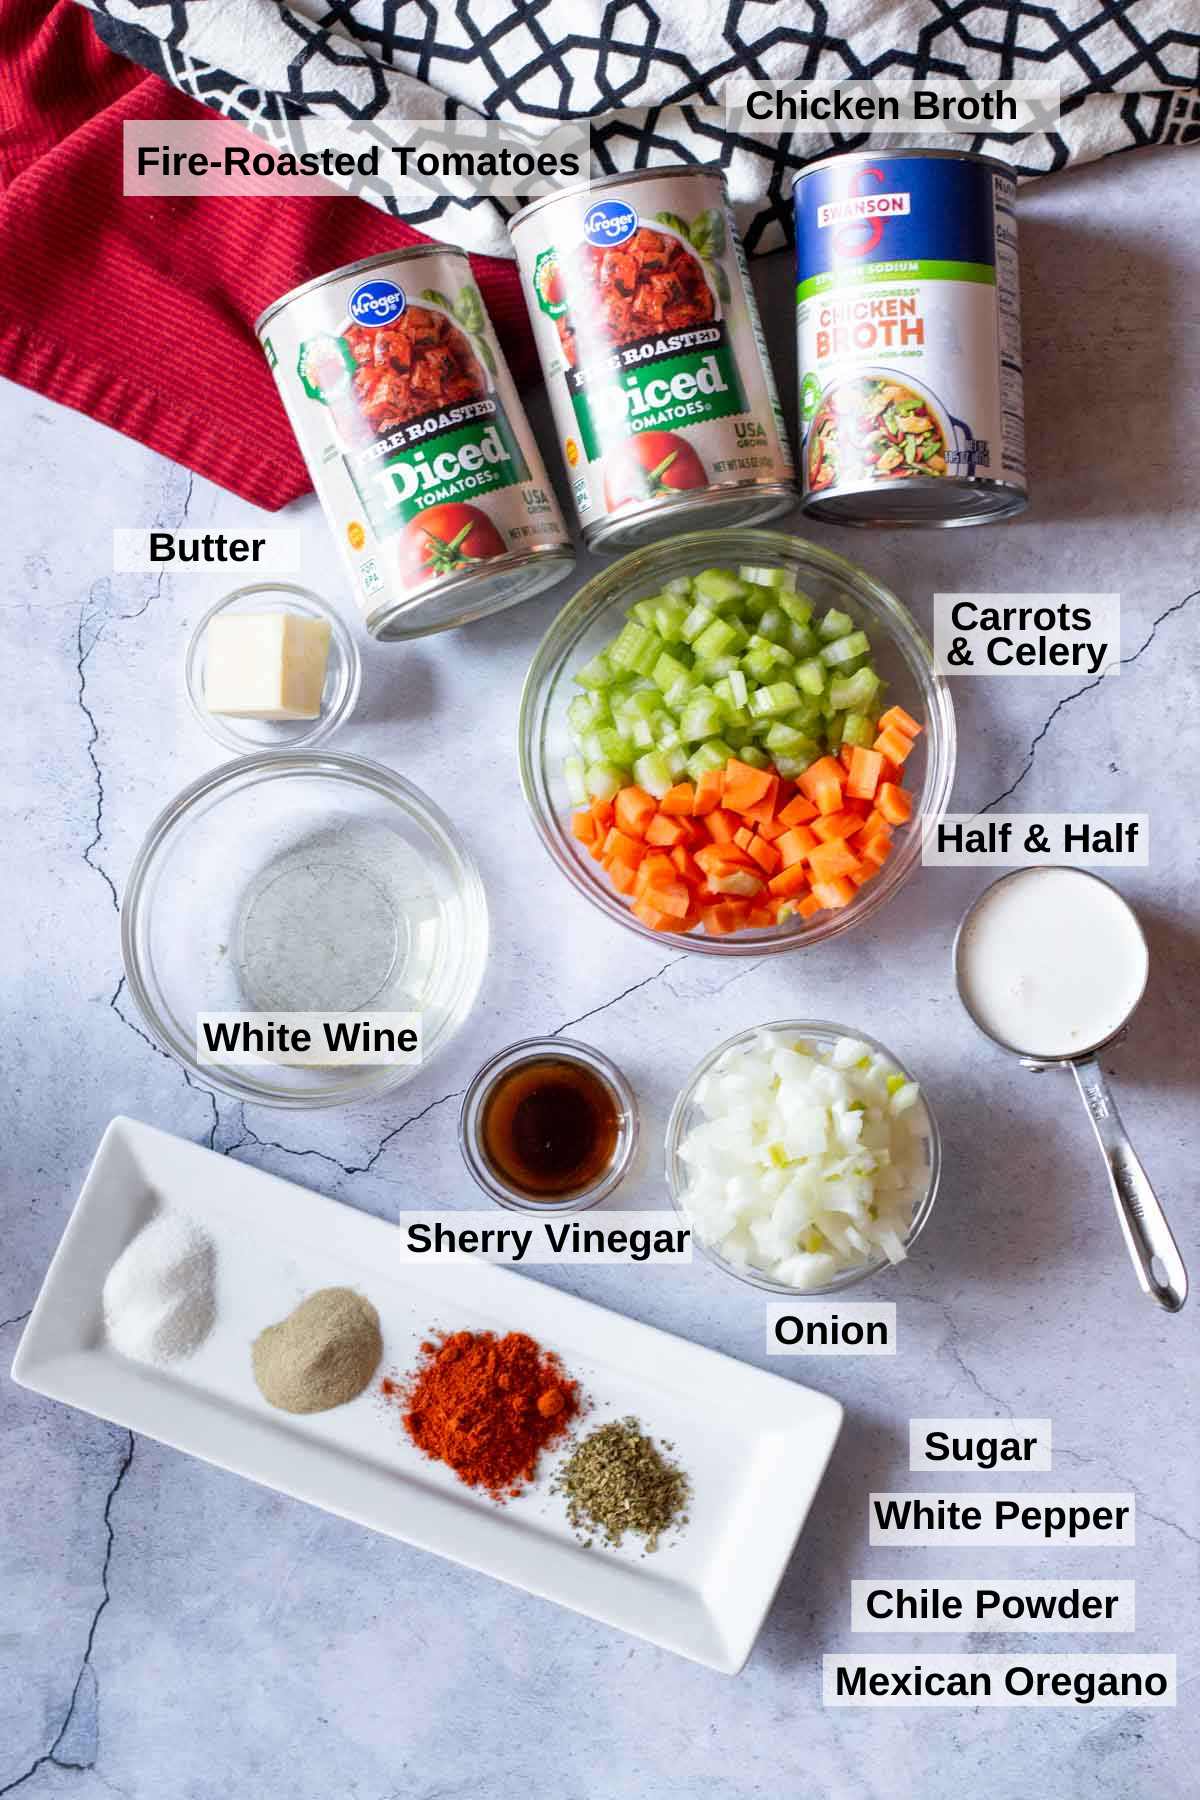 Ingredients to make spicy tomato soup from canned tomatoes.